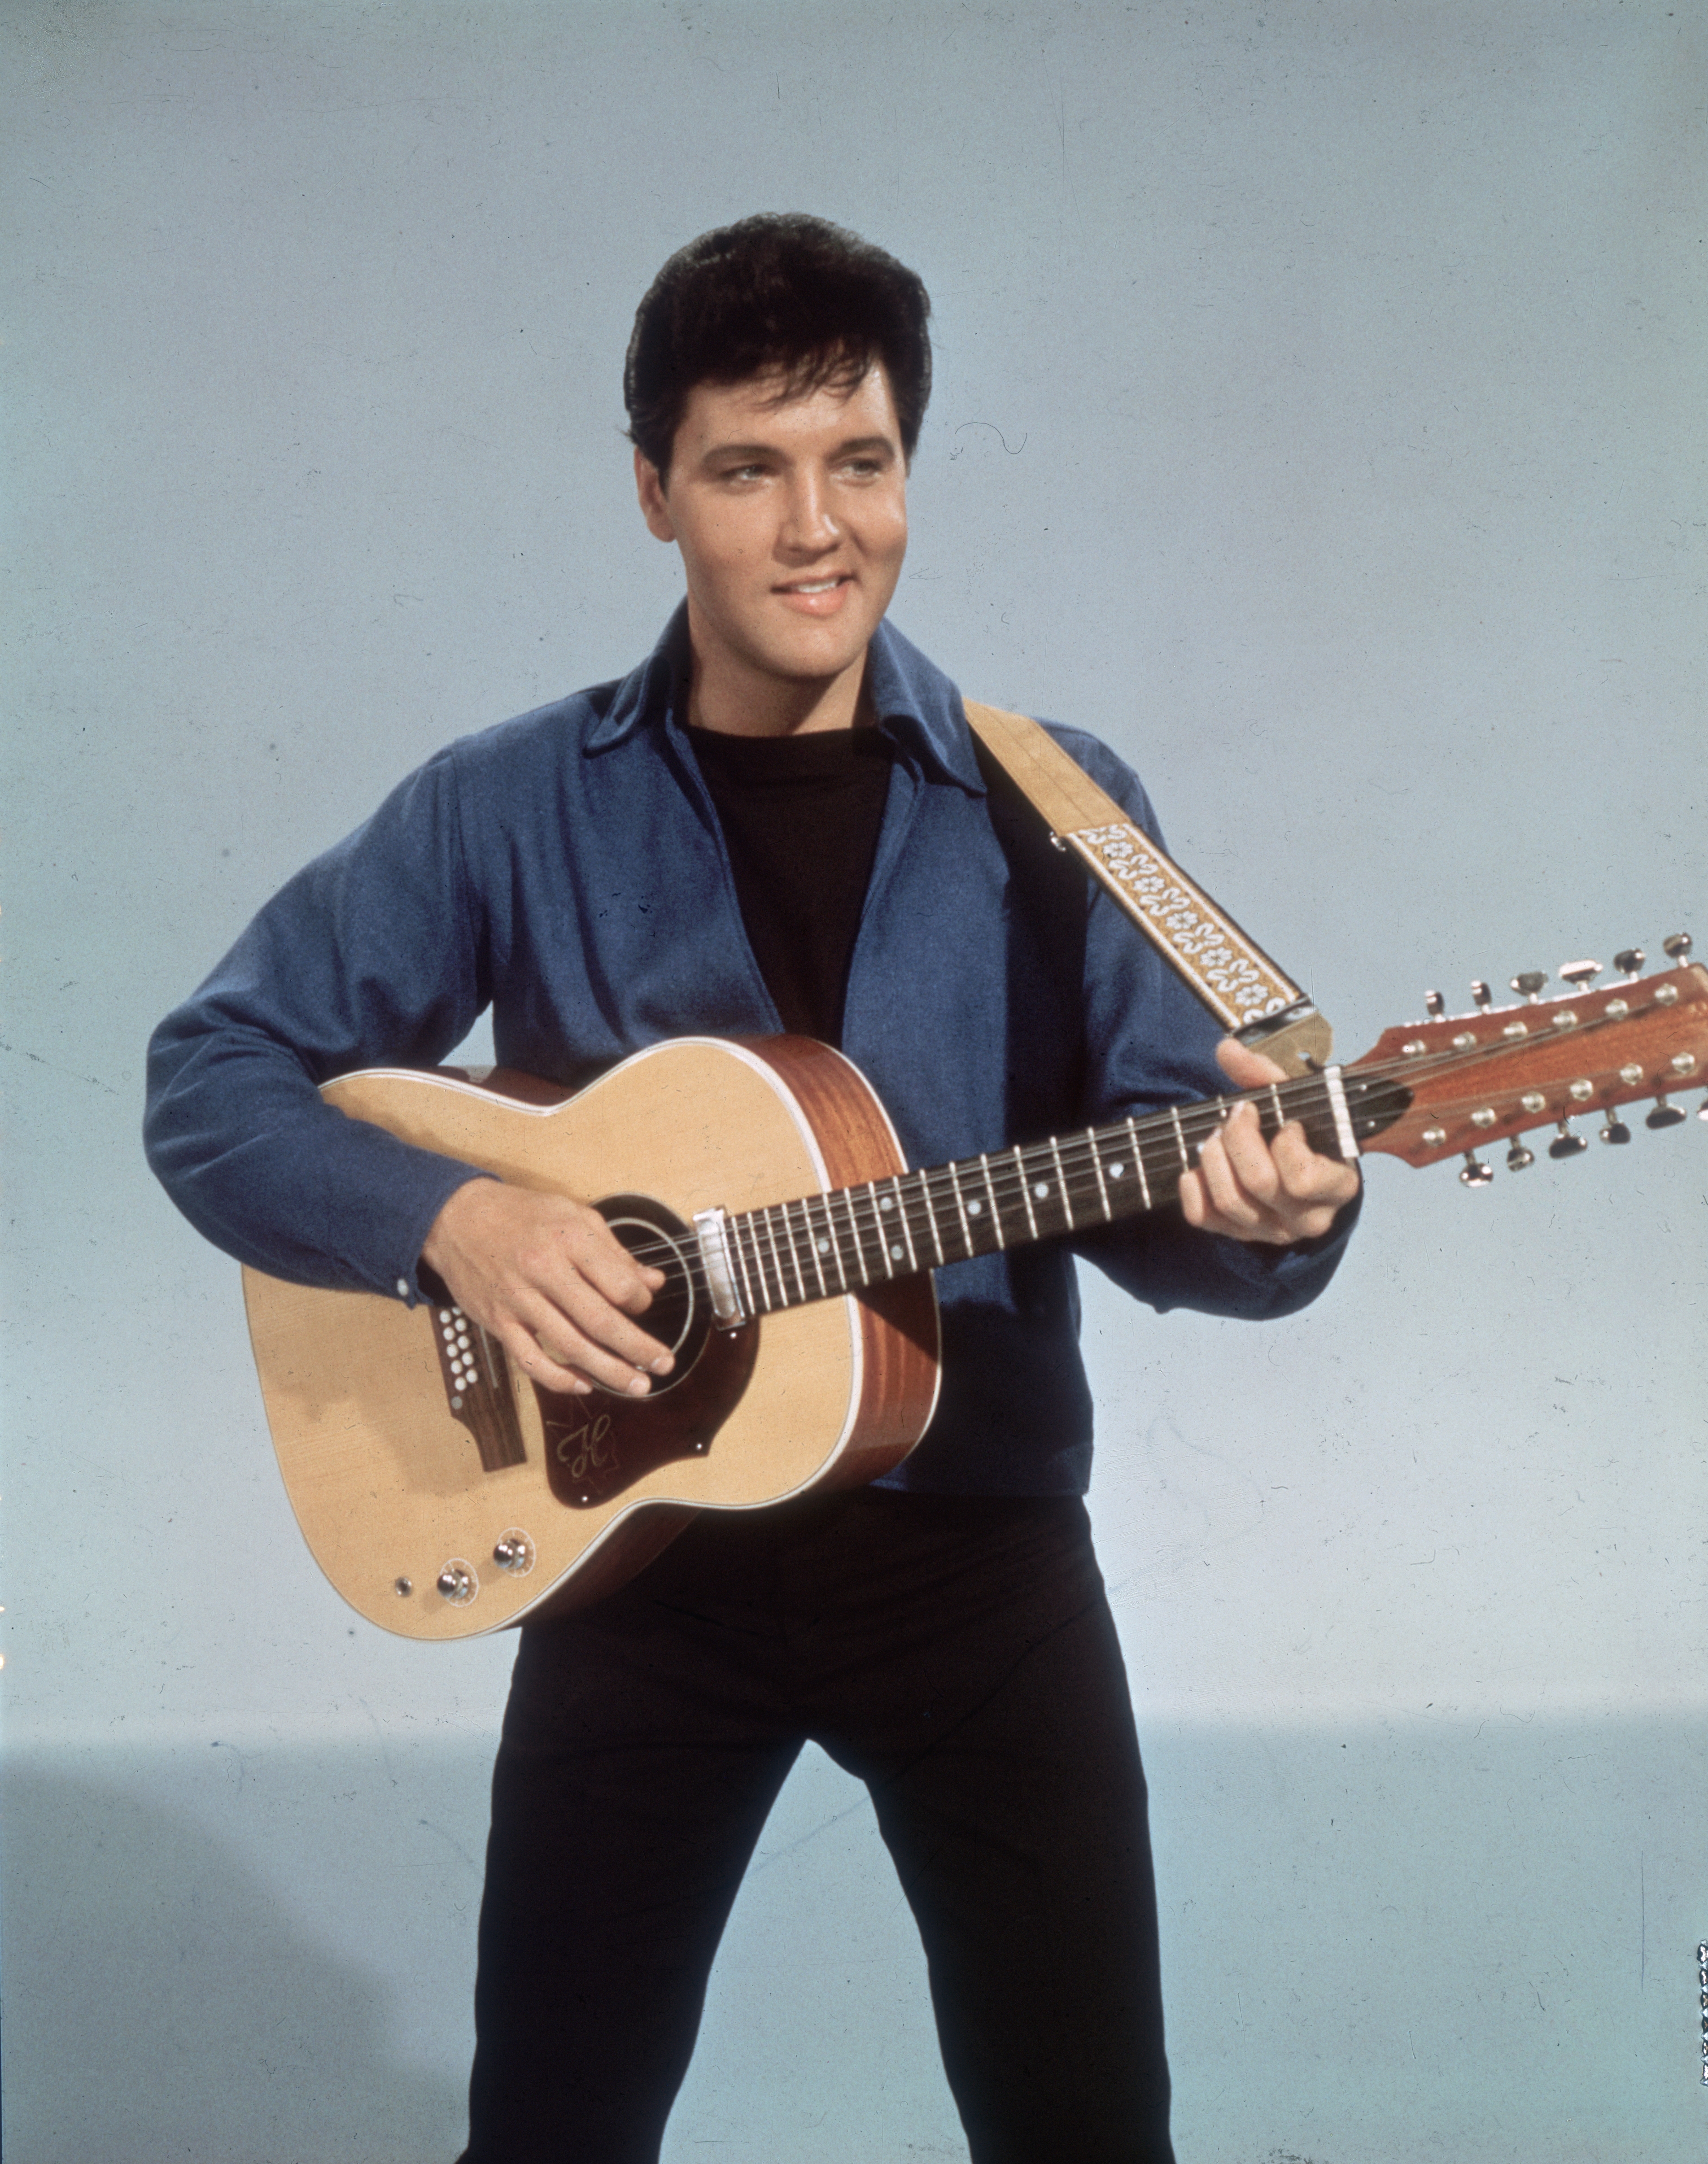 Elvis Presley posing for a picture with a guitar in 1955. | Source: Getty Images